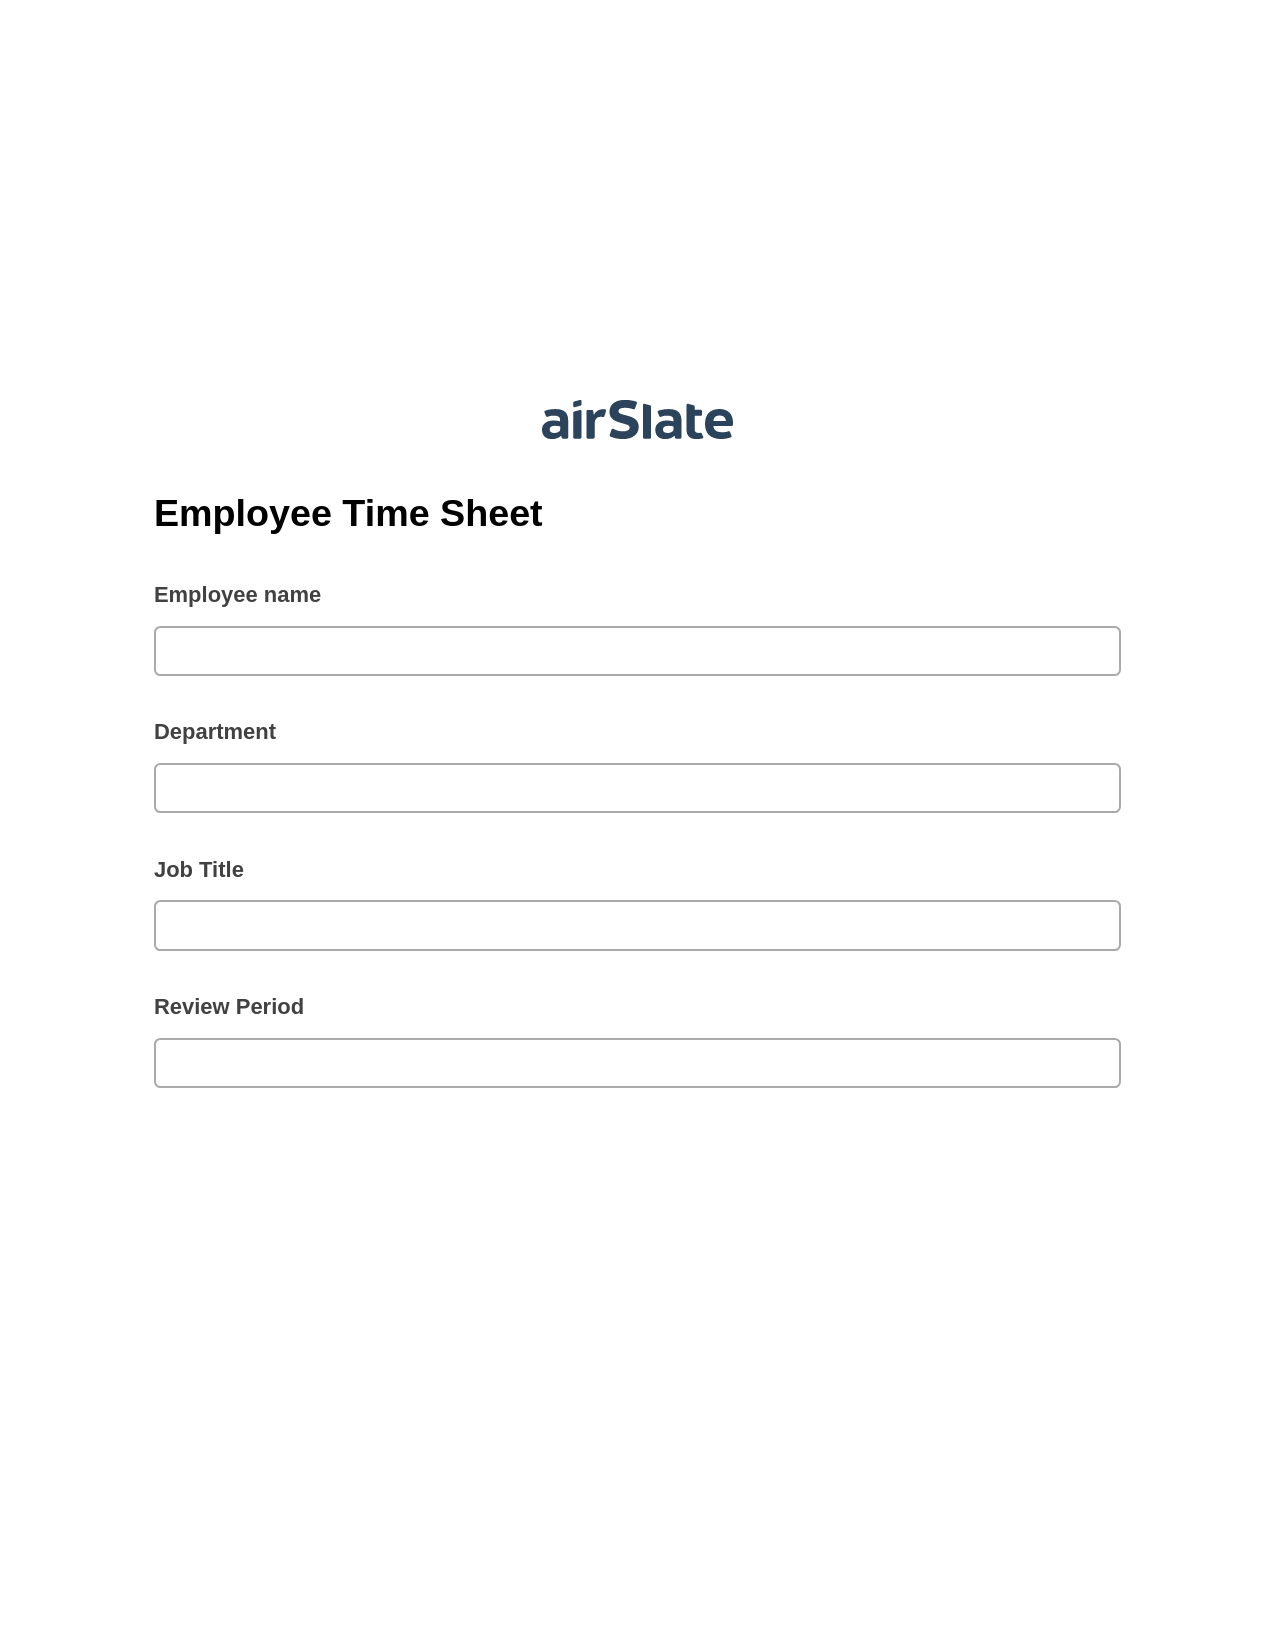 Employee Time Sheet Pre-fill Dropdowns from Airtable, Update Audit Trail Bot, Archive to Google Drive Bot